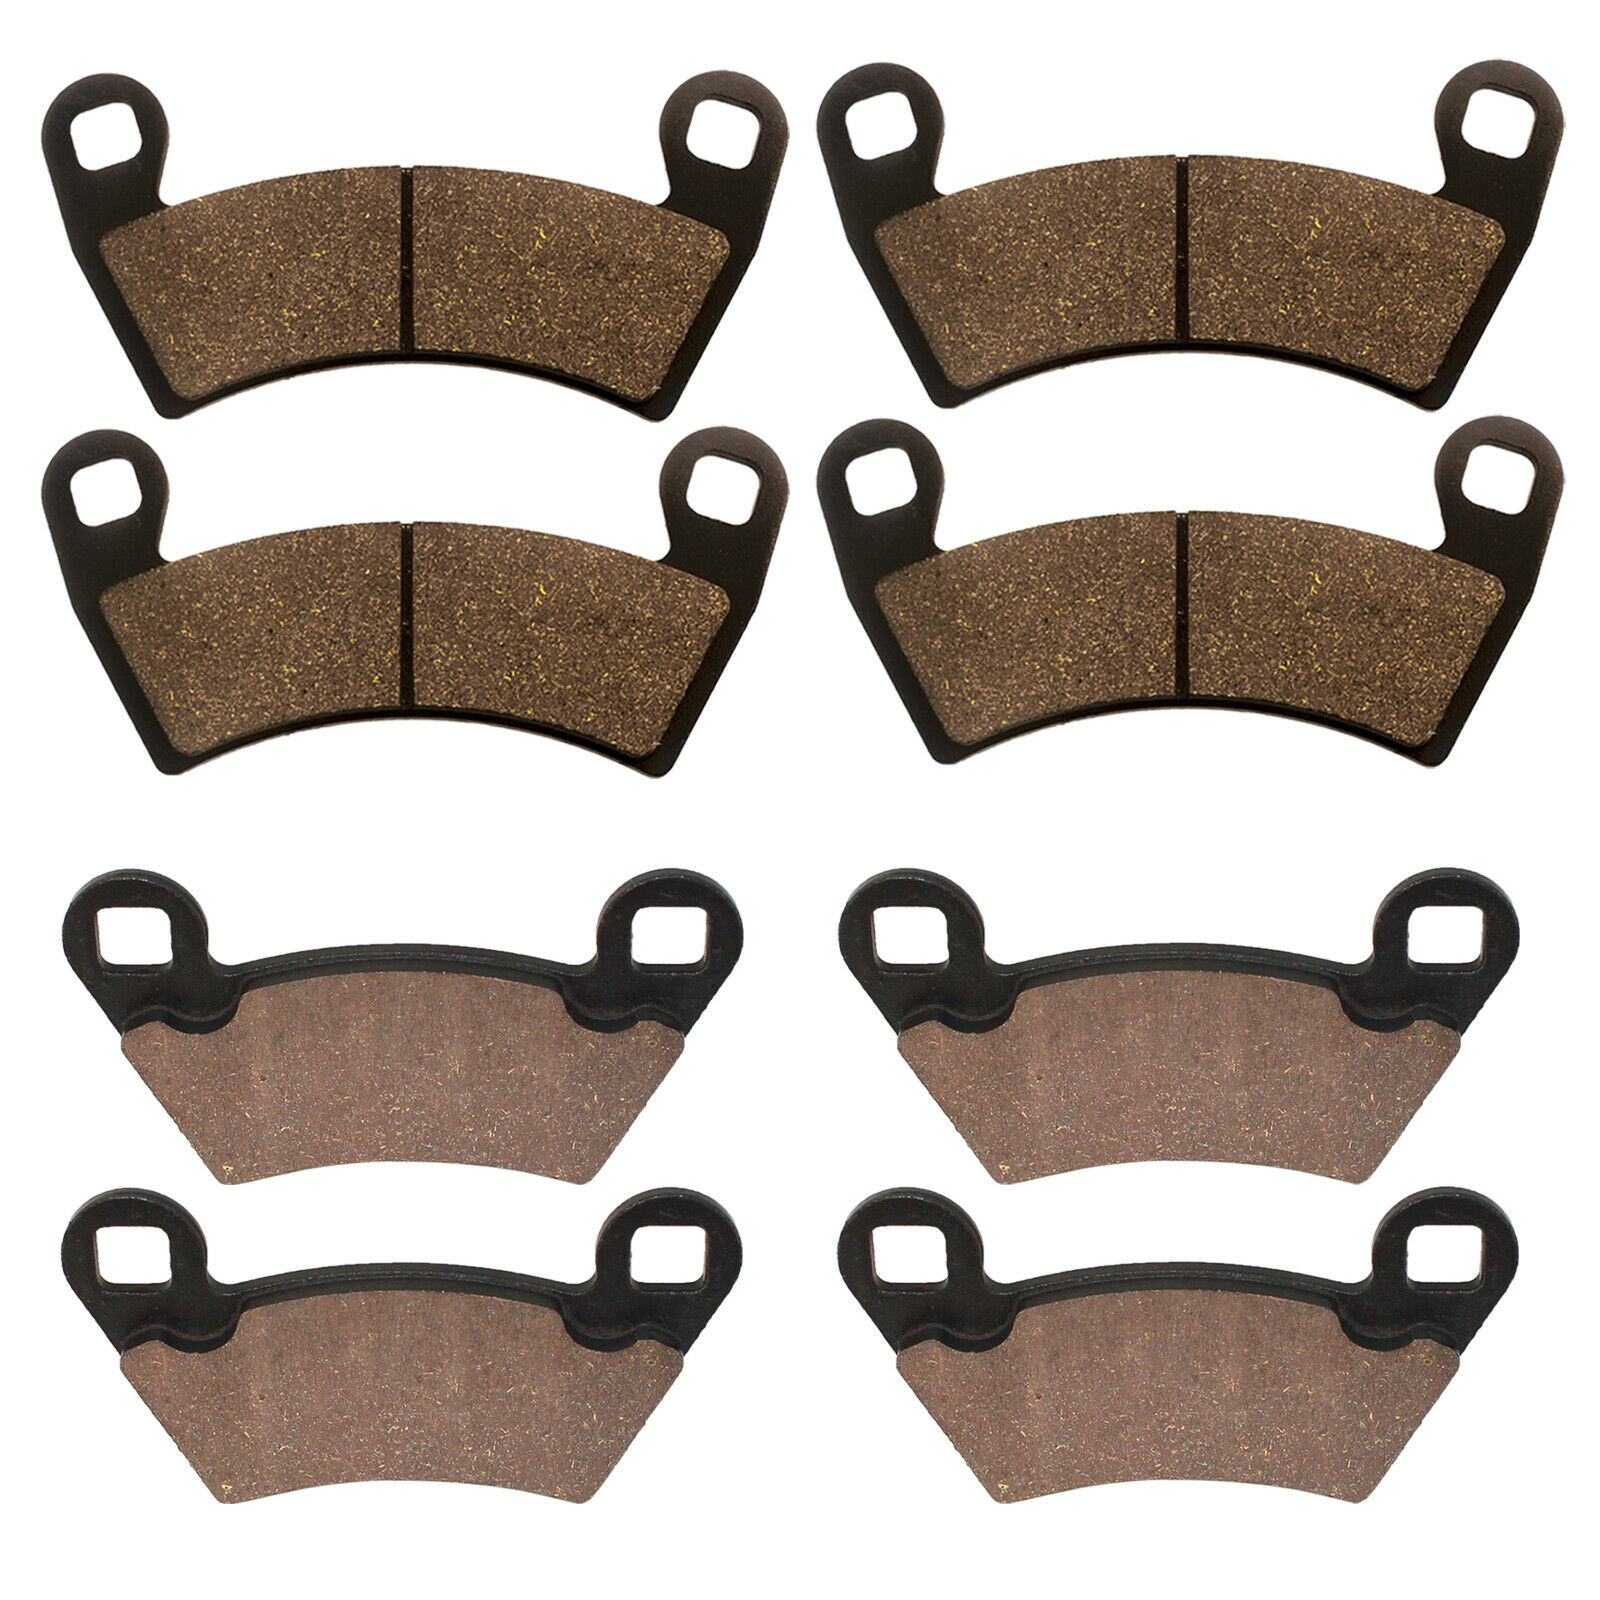 Caltric Front And Rear Brake Pads For Polaris Ranger Xp 900 2013-2019